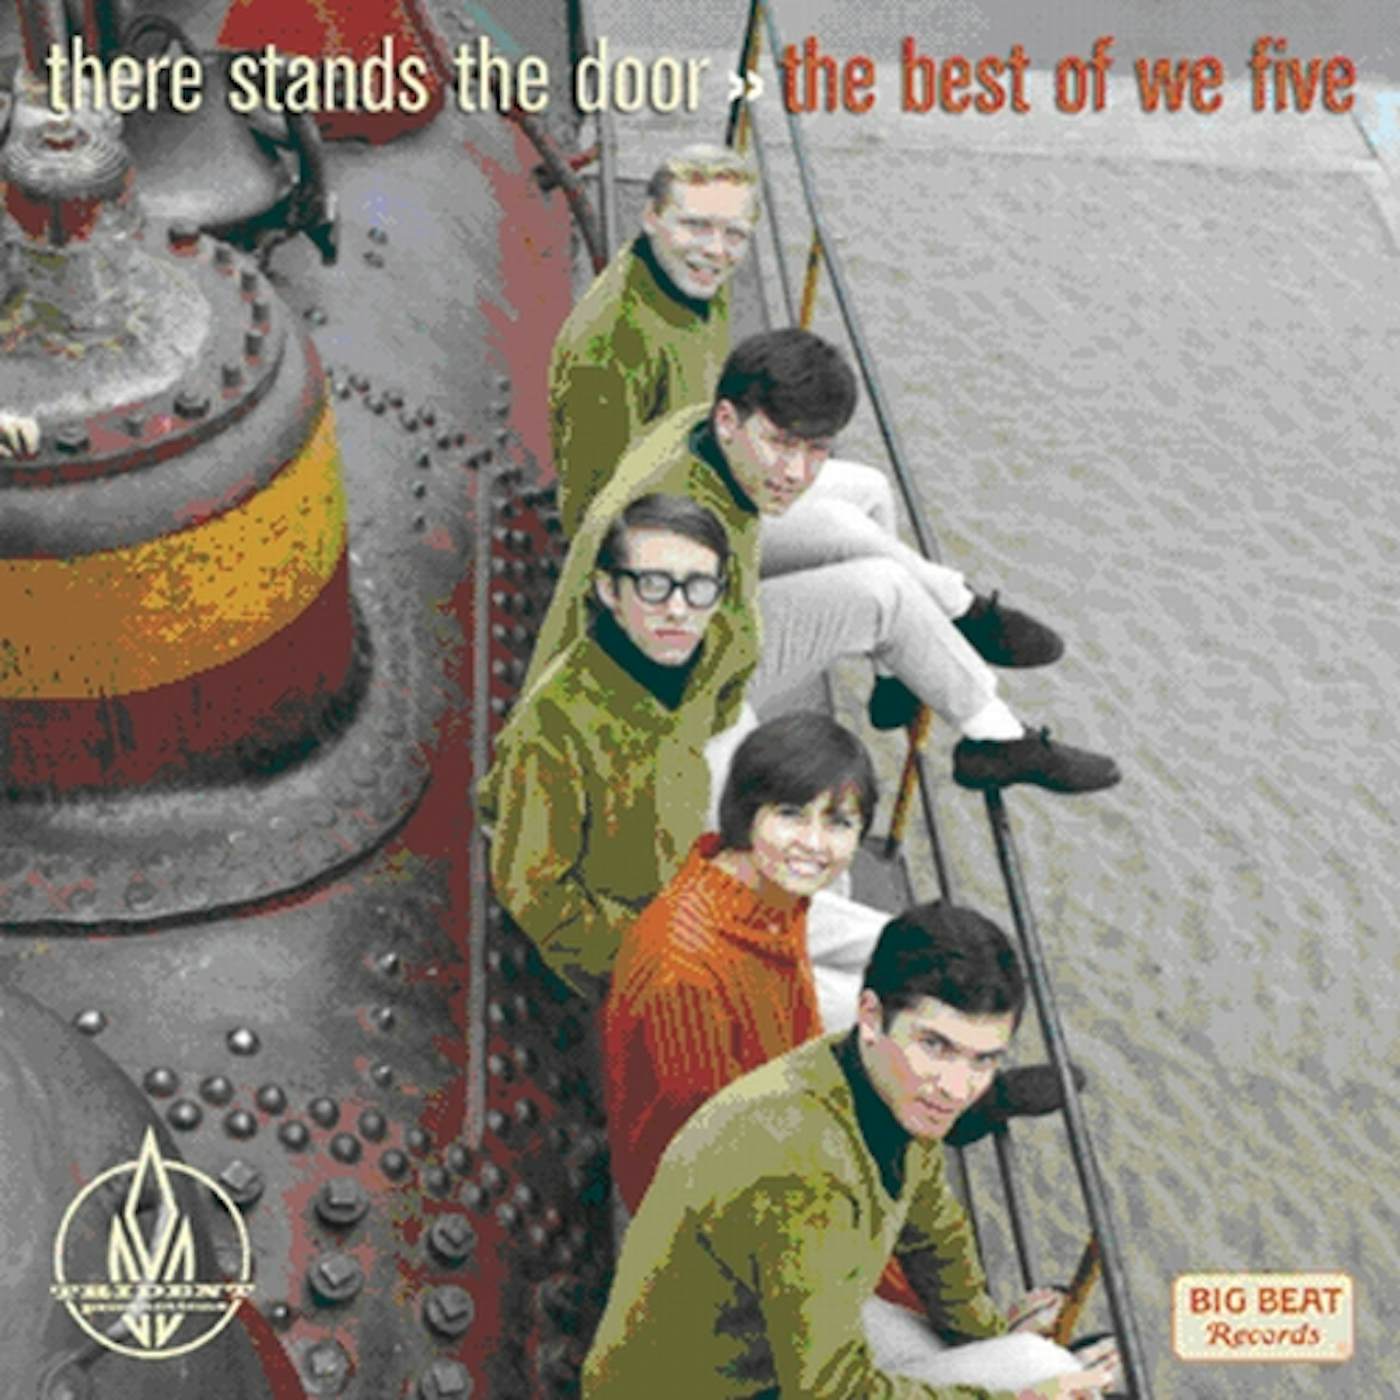 THERE STANDS THE DOOR: THE BEST OF WE FIVE CD